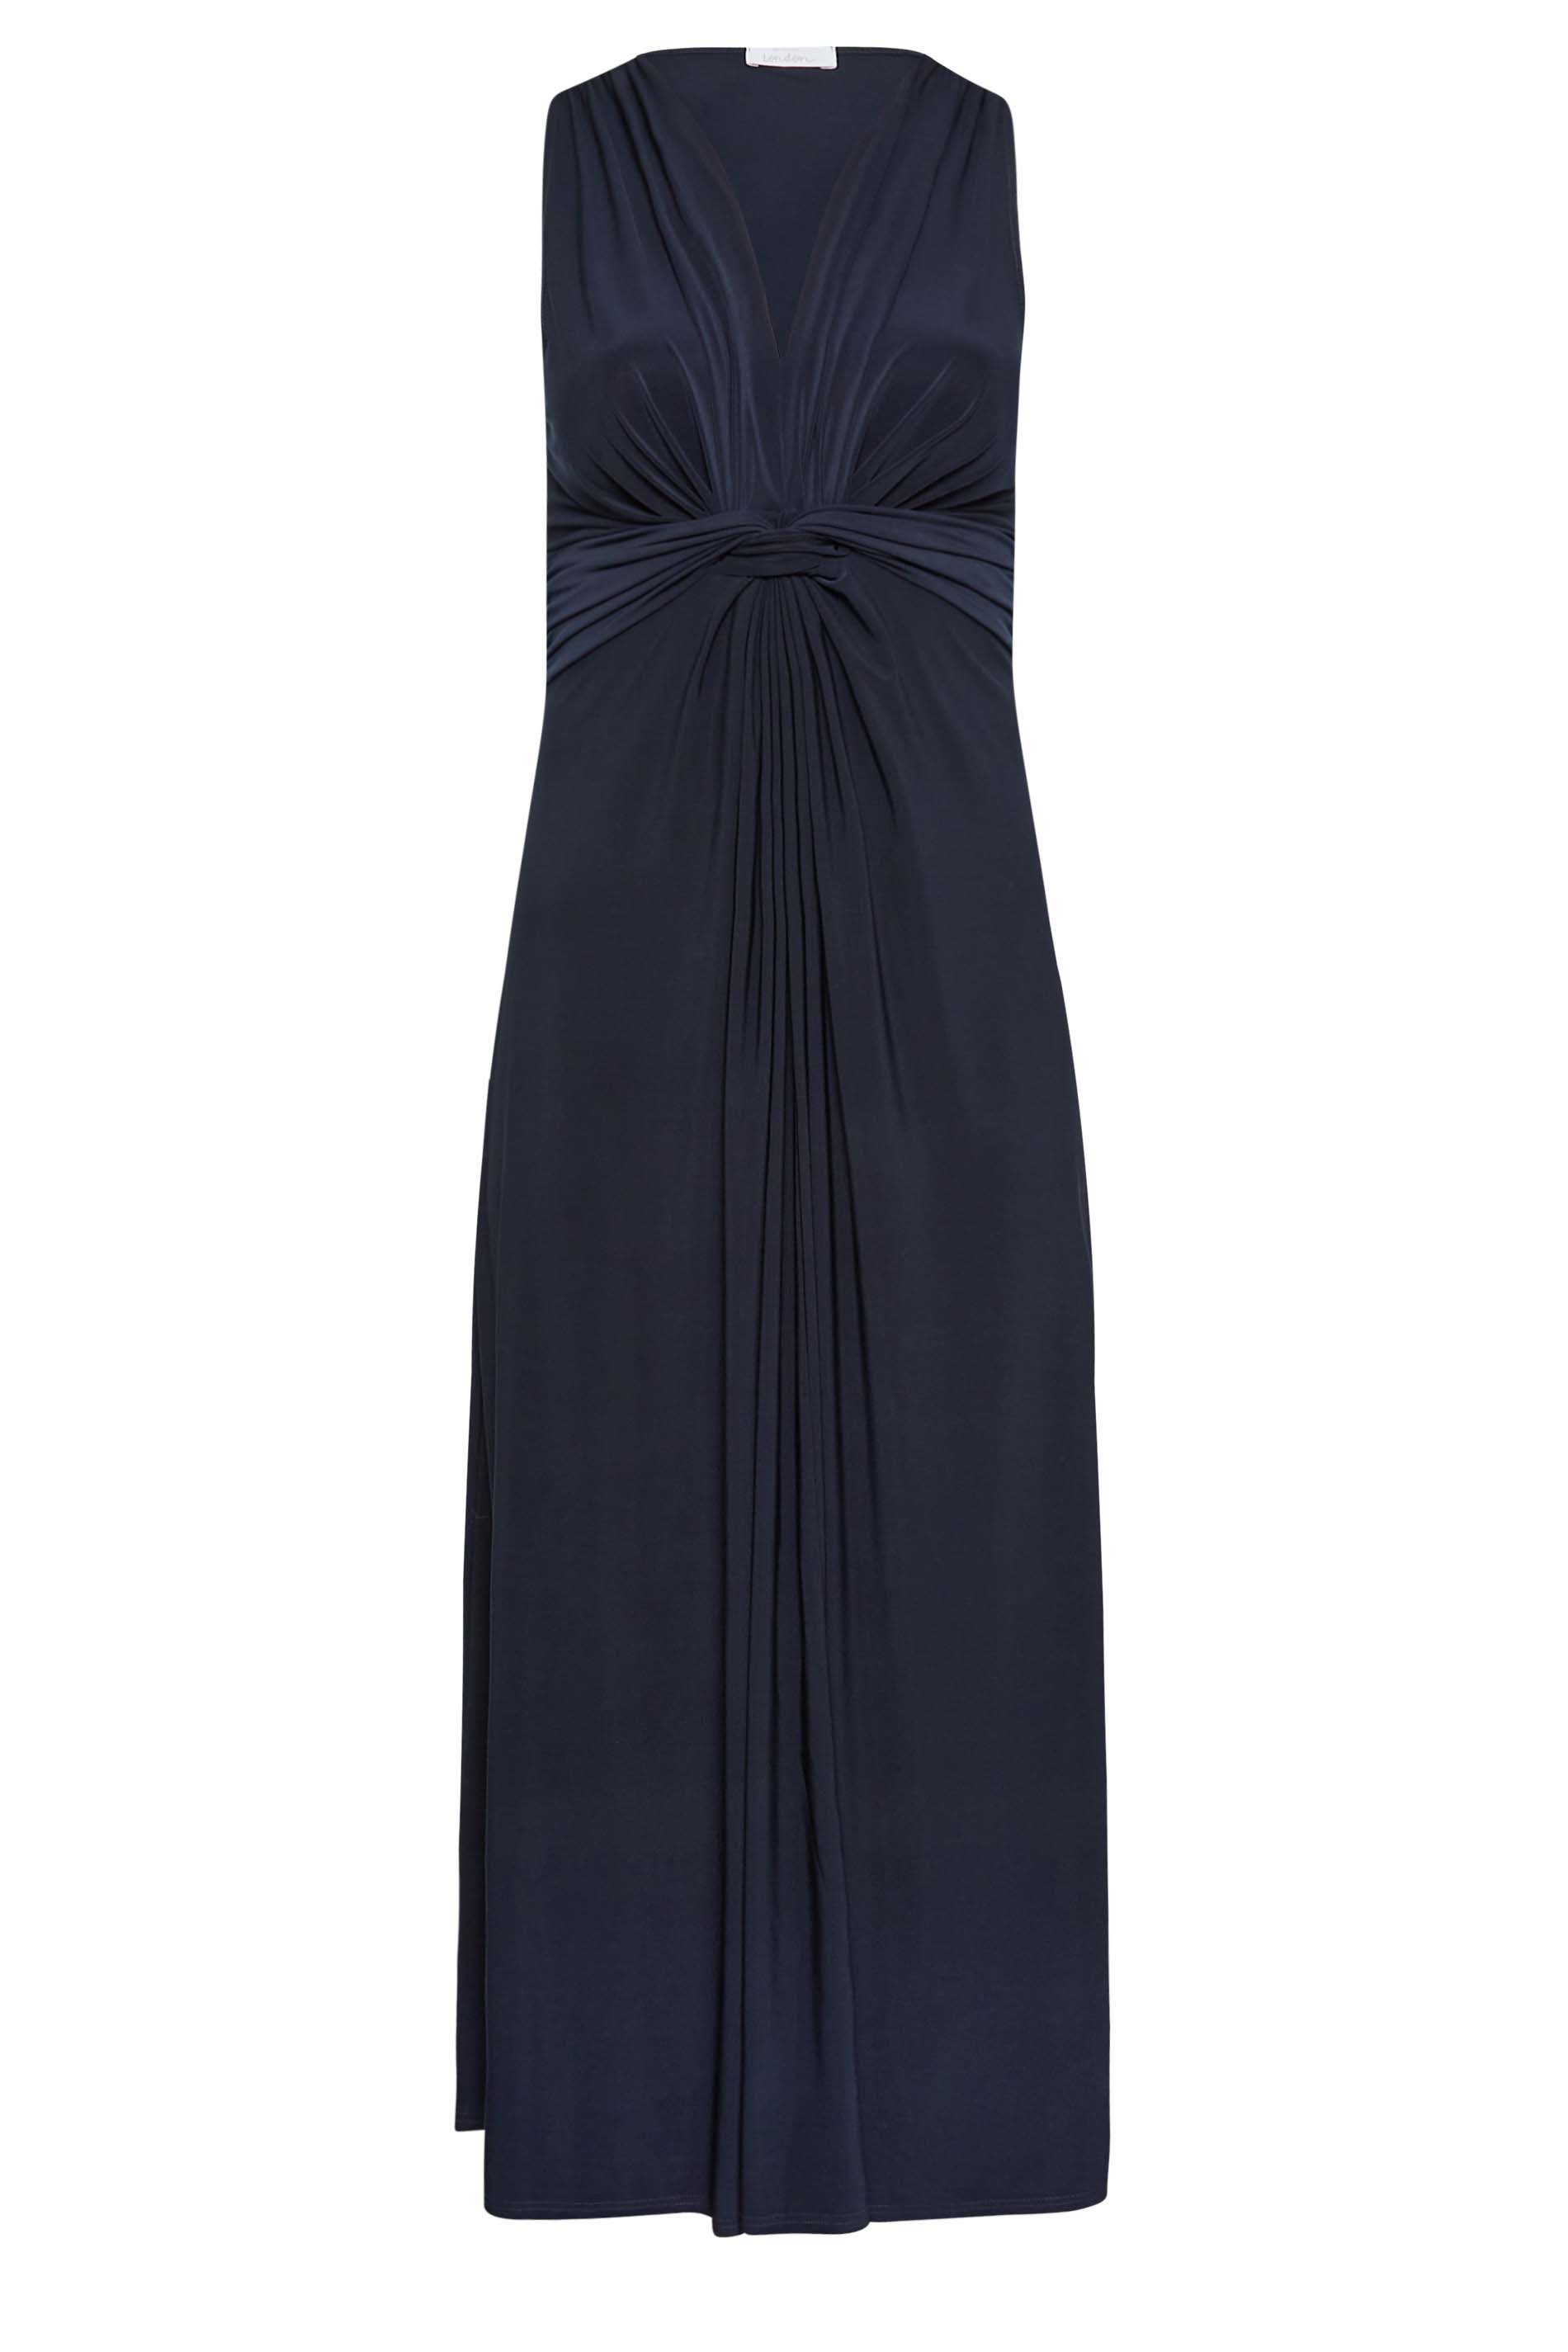 YOURS LONDON Plus Size Navy Blue Knot Front Maxi Dress | Yours Clothing